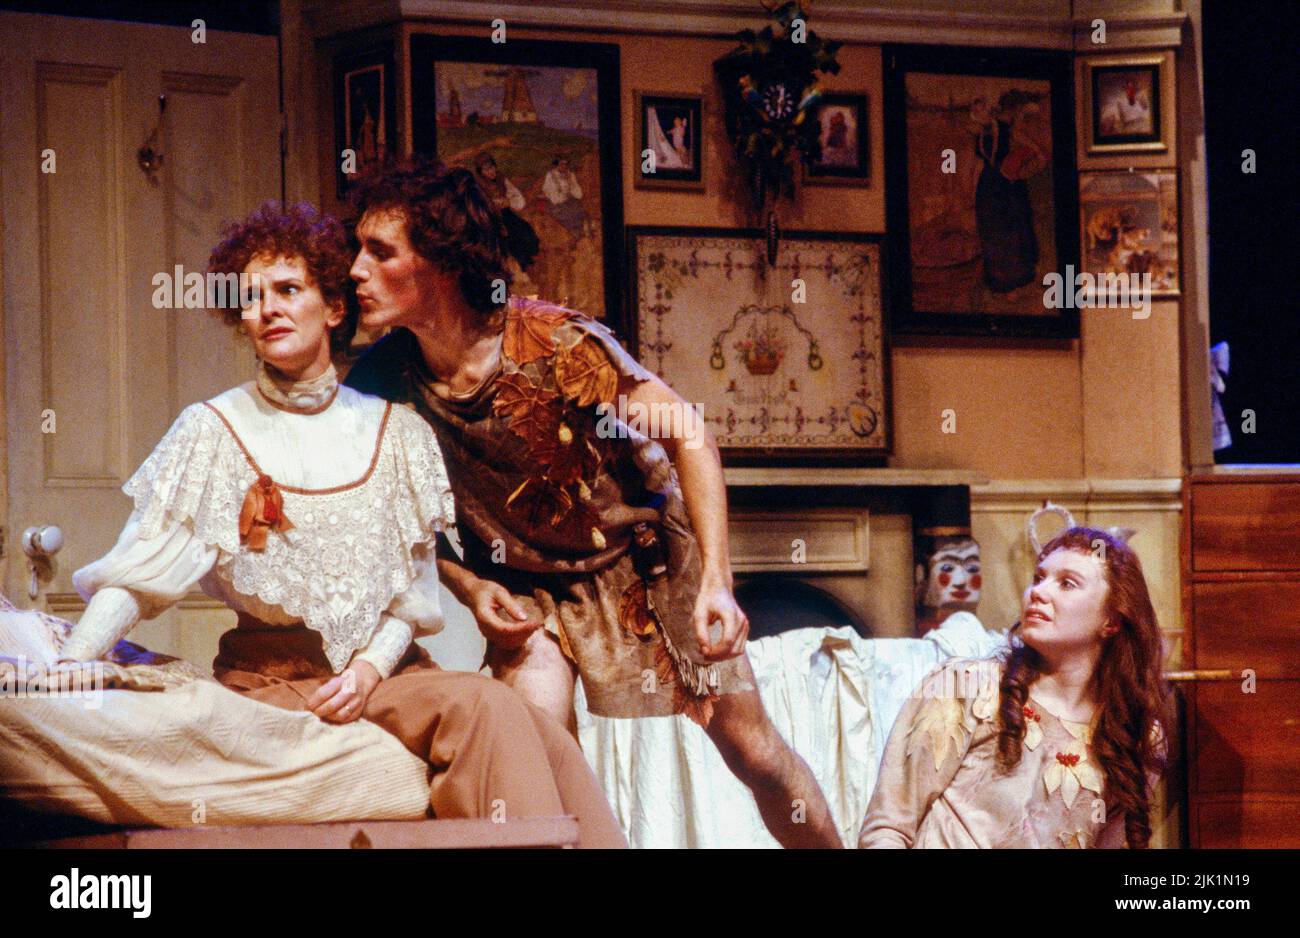 l-r: Frances Tomelty (Mrs Darling), Mark Rylance (Peter Pan), Katy Behean (Wendy) in PETER PAN by J M Barrie at the Royal Shakespeare Company (RSC), Barbican Theatre, London EC2  17/12/1983  set design: John Napier  costumes: Andreane Neofitou  lighting: David Hersey  fights: Malcolm Ranson  directors: John Caird & Trevor Nunn Stock Photo